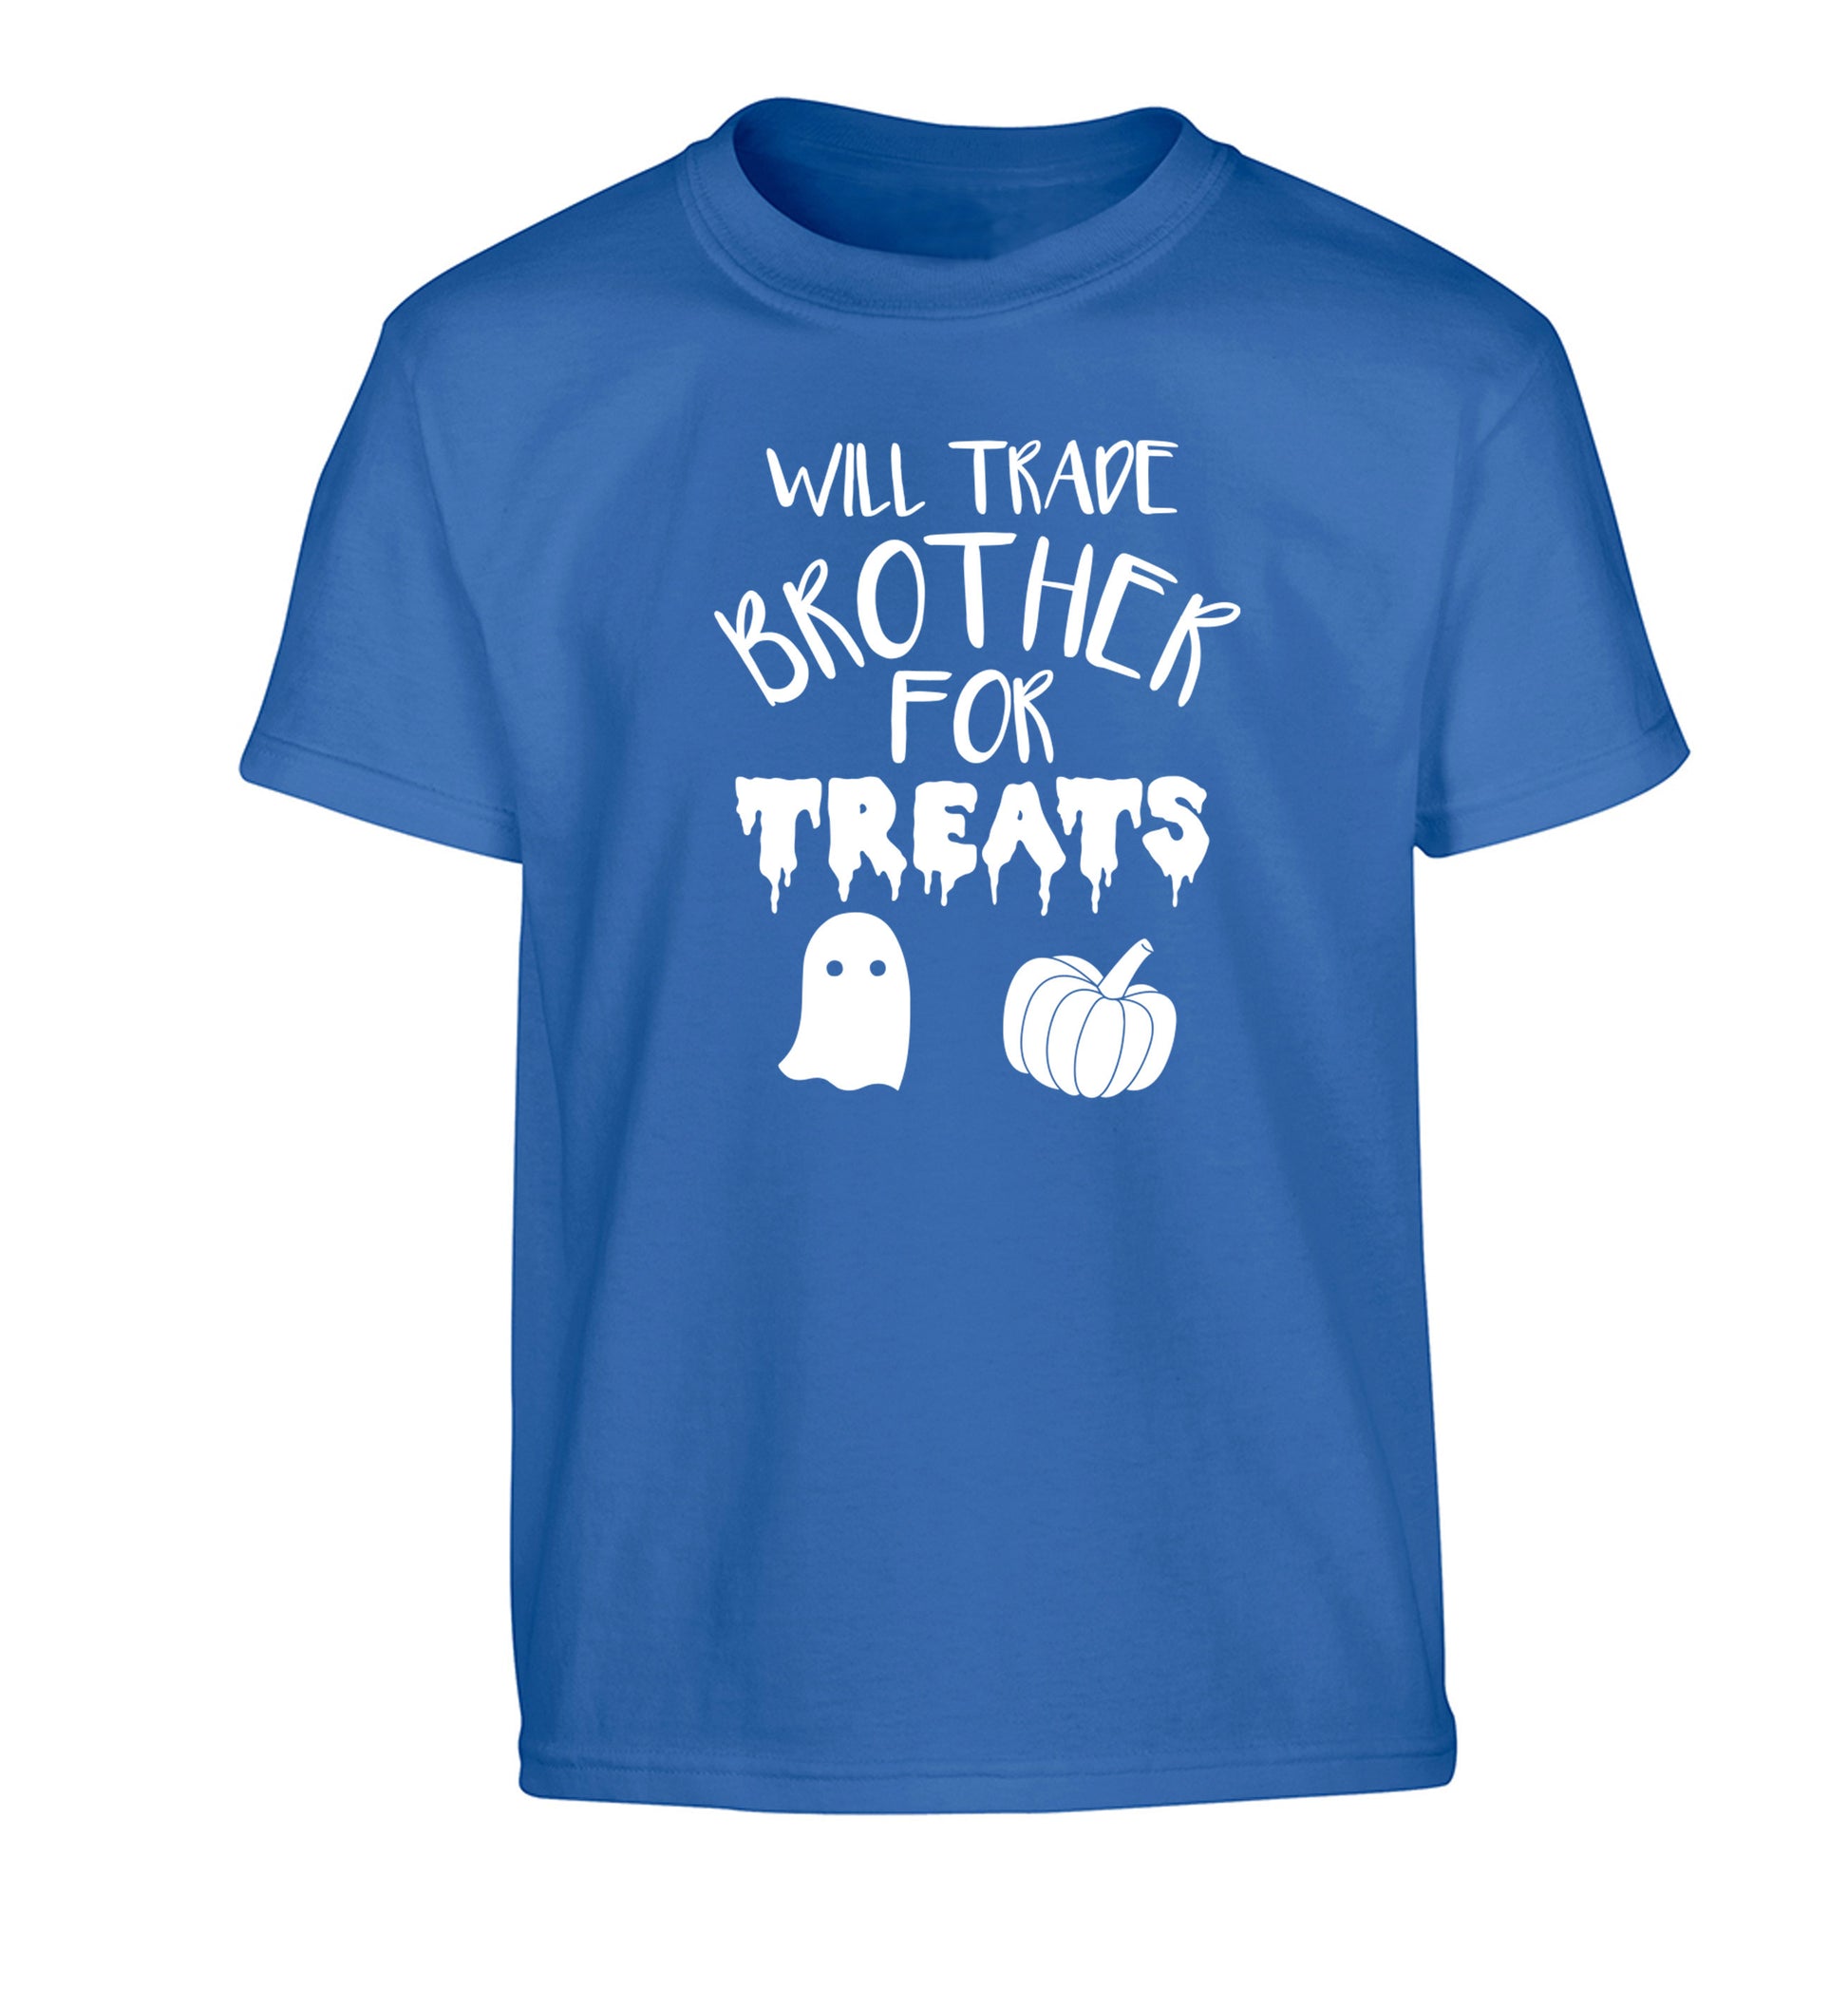 Will trade brother for treats Children's blue Tshirt 12-14 Years